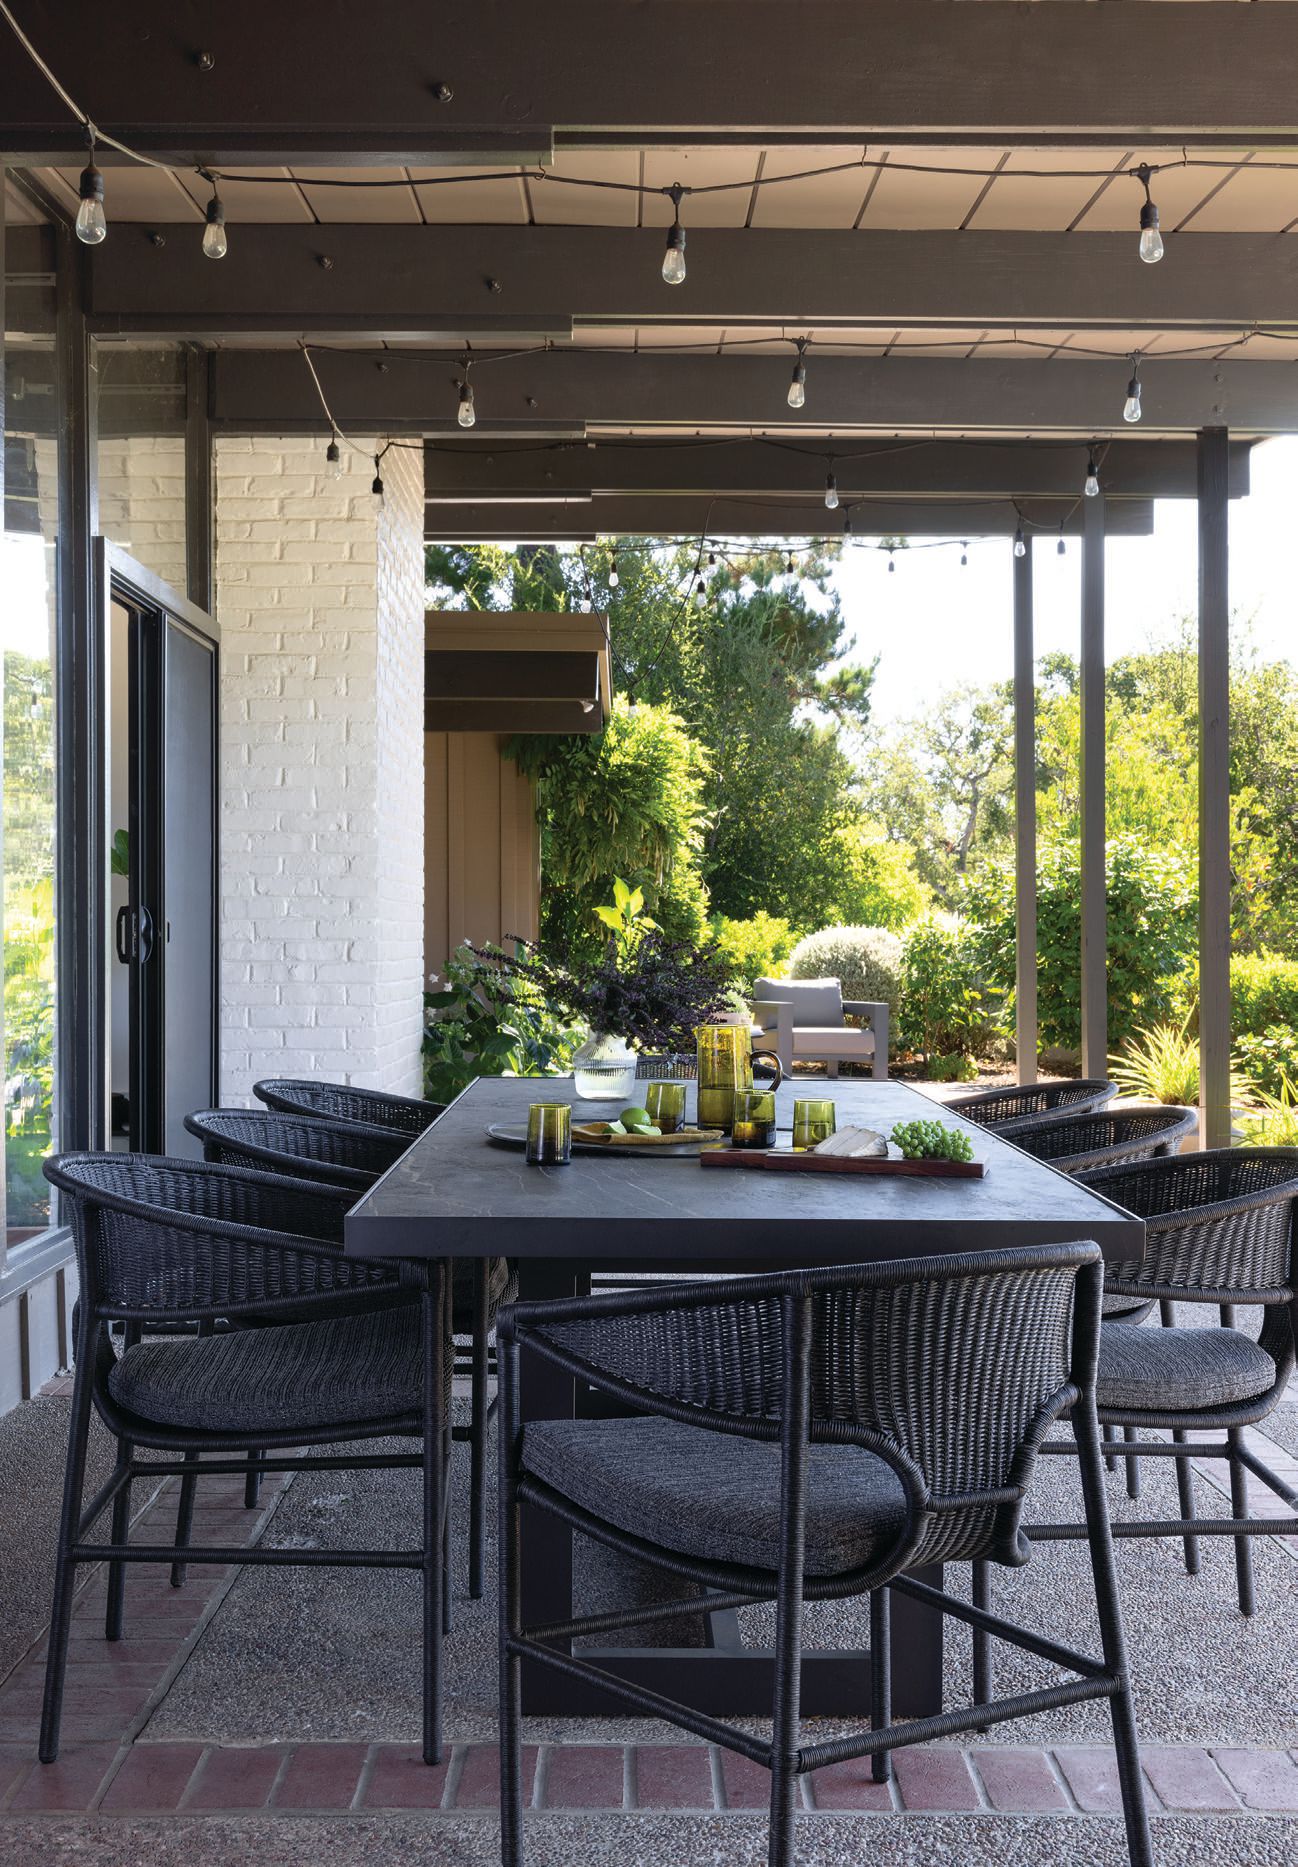 The outdoor living space extends the functional reach of the new design. PHOTOGRAPHED BY BESS FRIDAY STYLED BY BETH PROTASS